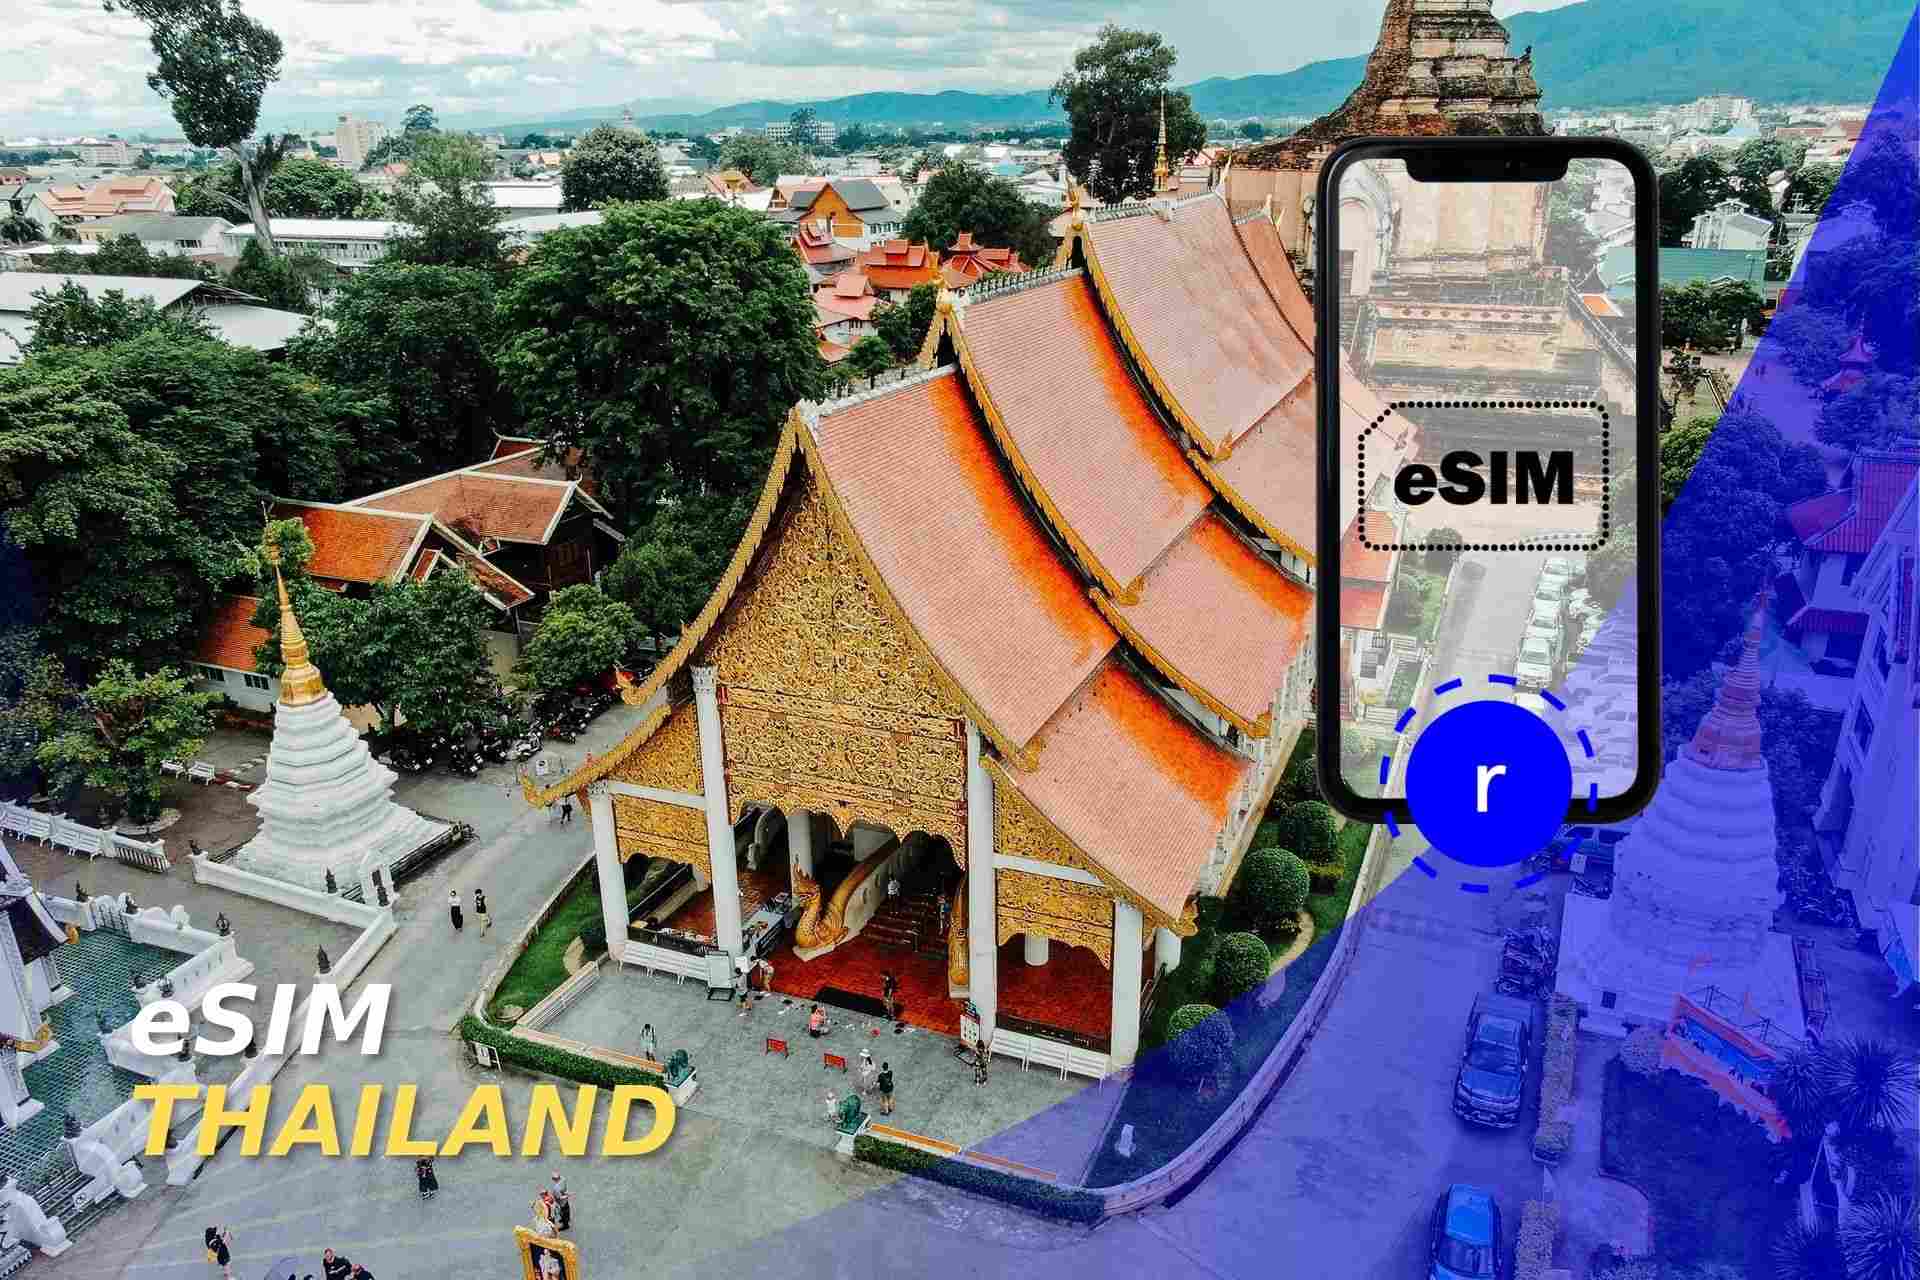 esim to have internet when traveling to thailand